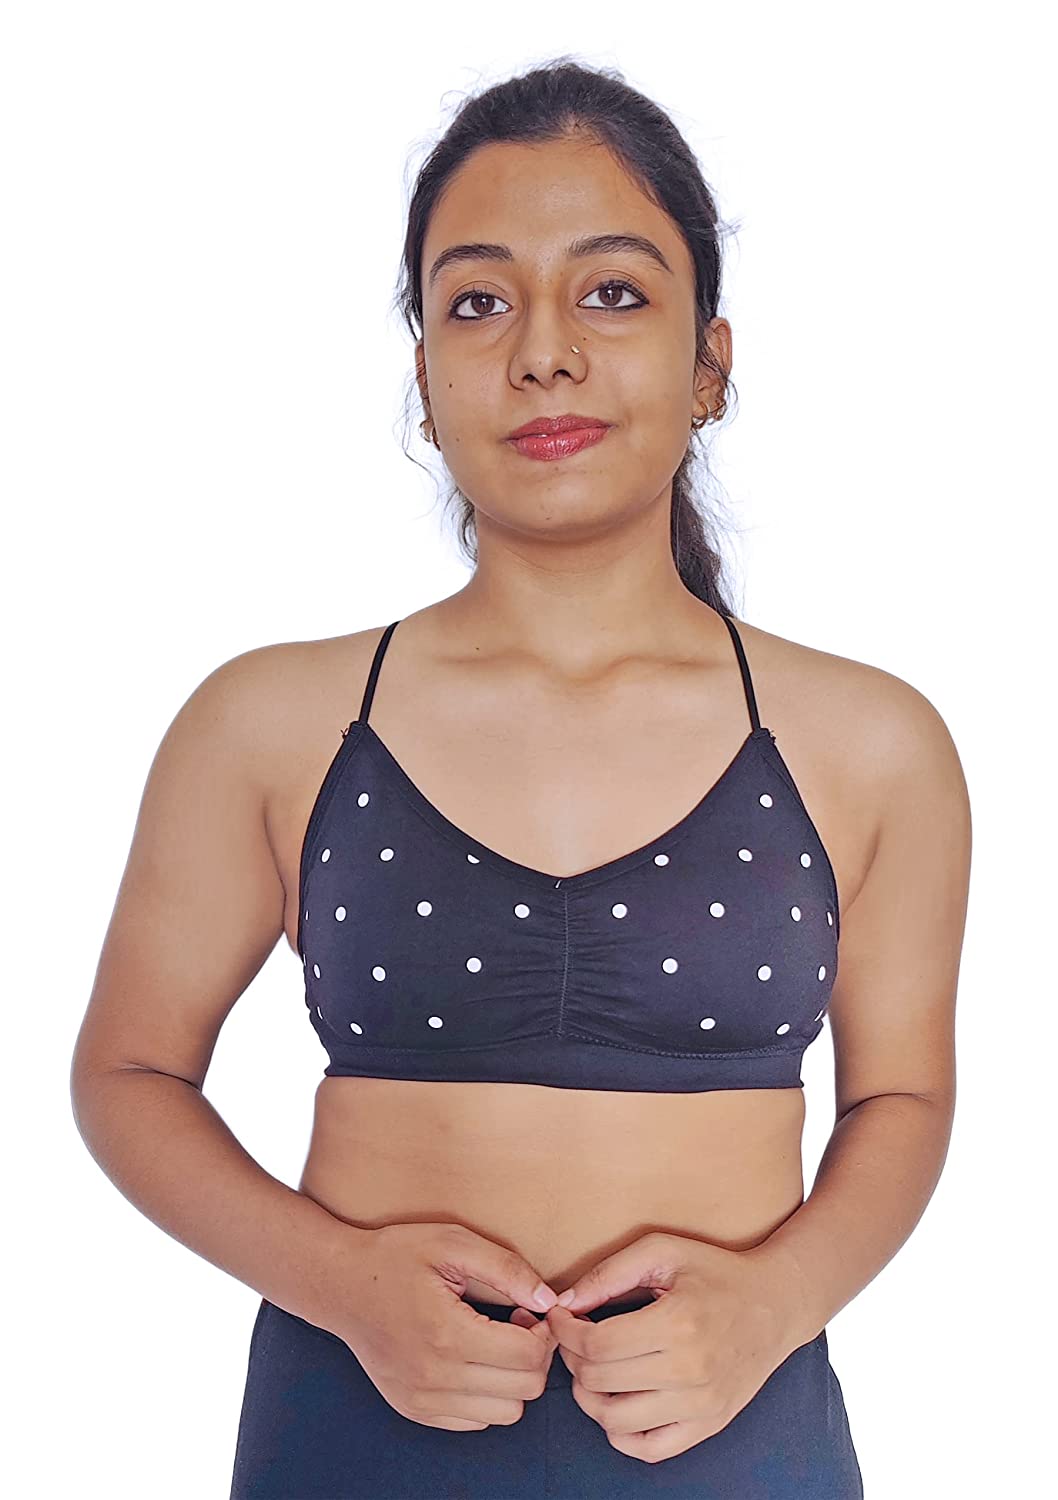 sai fashion Sports bra Women Sports Non Padded Bra - Buy sai fashion Sports  bra Women Sports Non Padded Bra Online at Best Prices in India